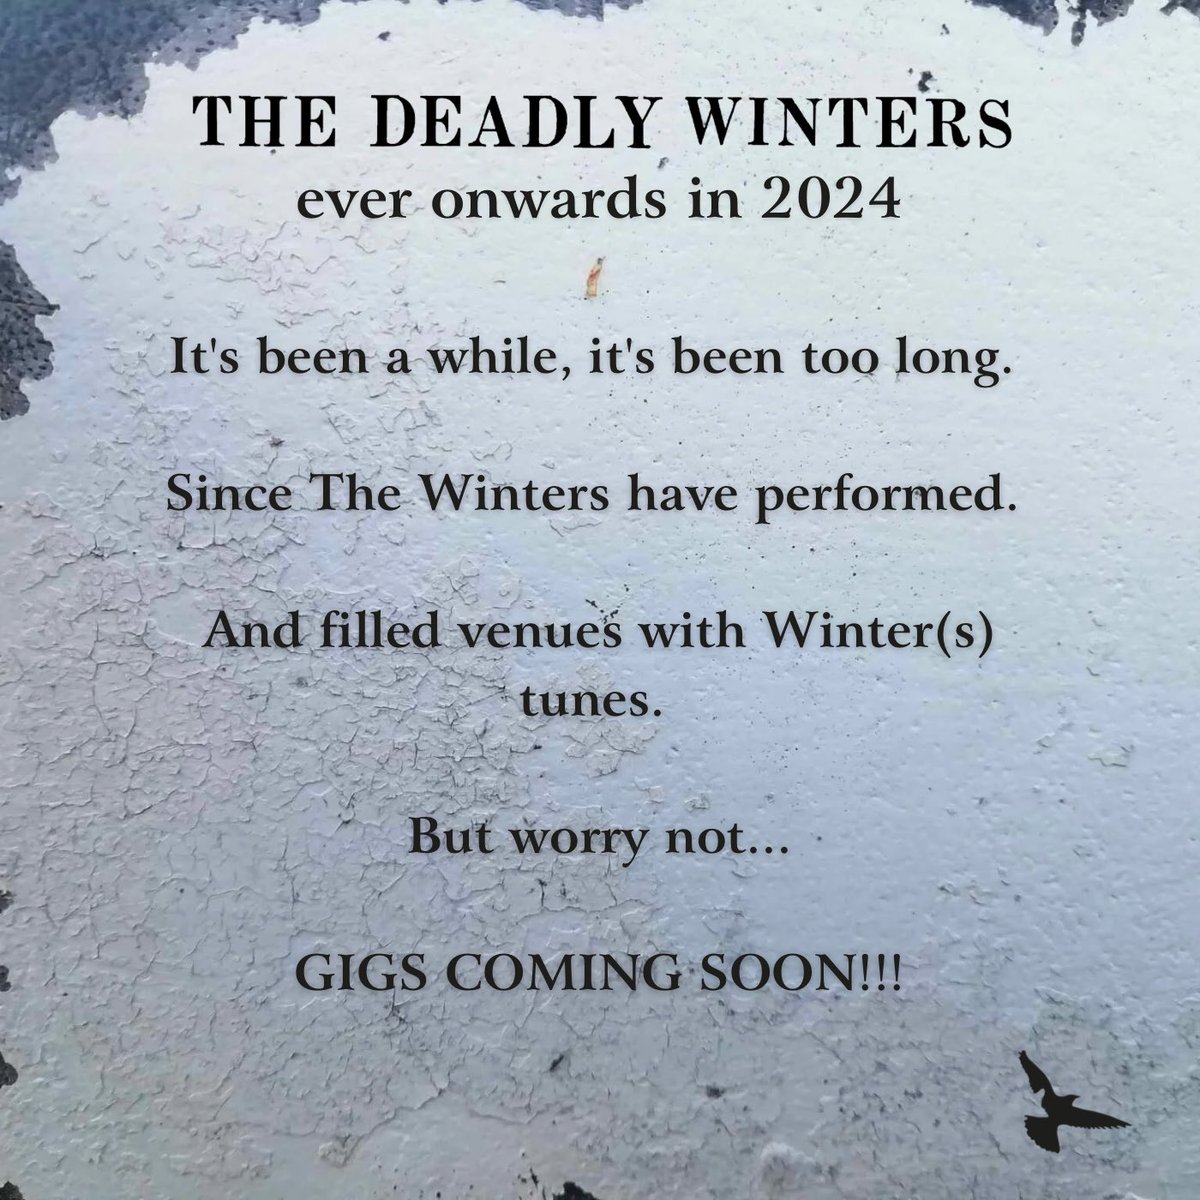 It’s been a while, it’s been too long. 

Since The Winters have performed. 

And filled venues with Winter(s) tunes. 

But worry not...

GIGS COMING SOON!!!

#thedeadlywinters #gigsinscotland #gigs #livemusic #altfolk #alternativefolk #alternativefolkmusic #everonwards